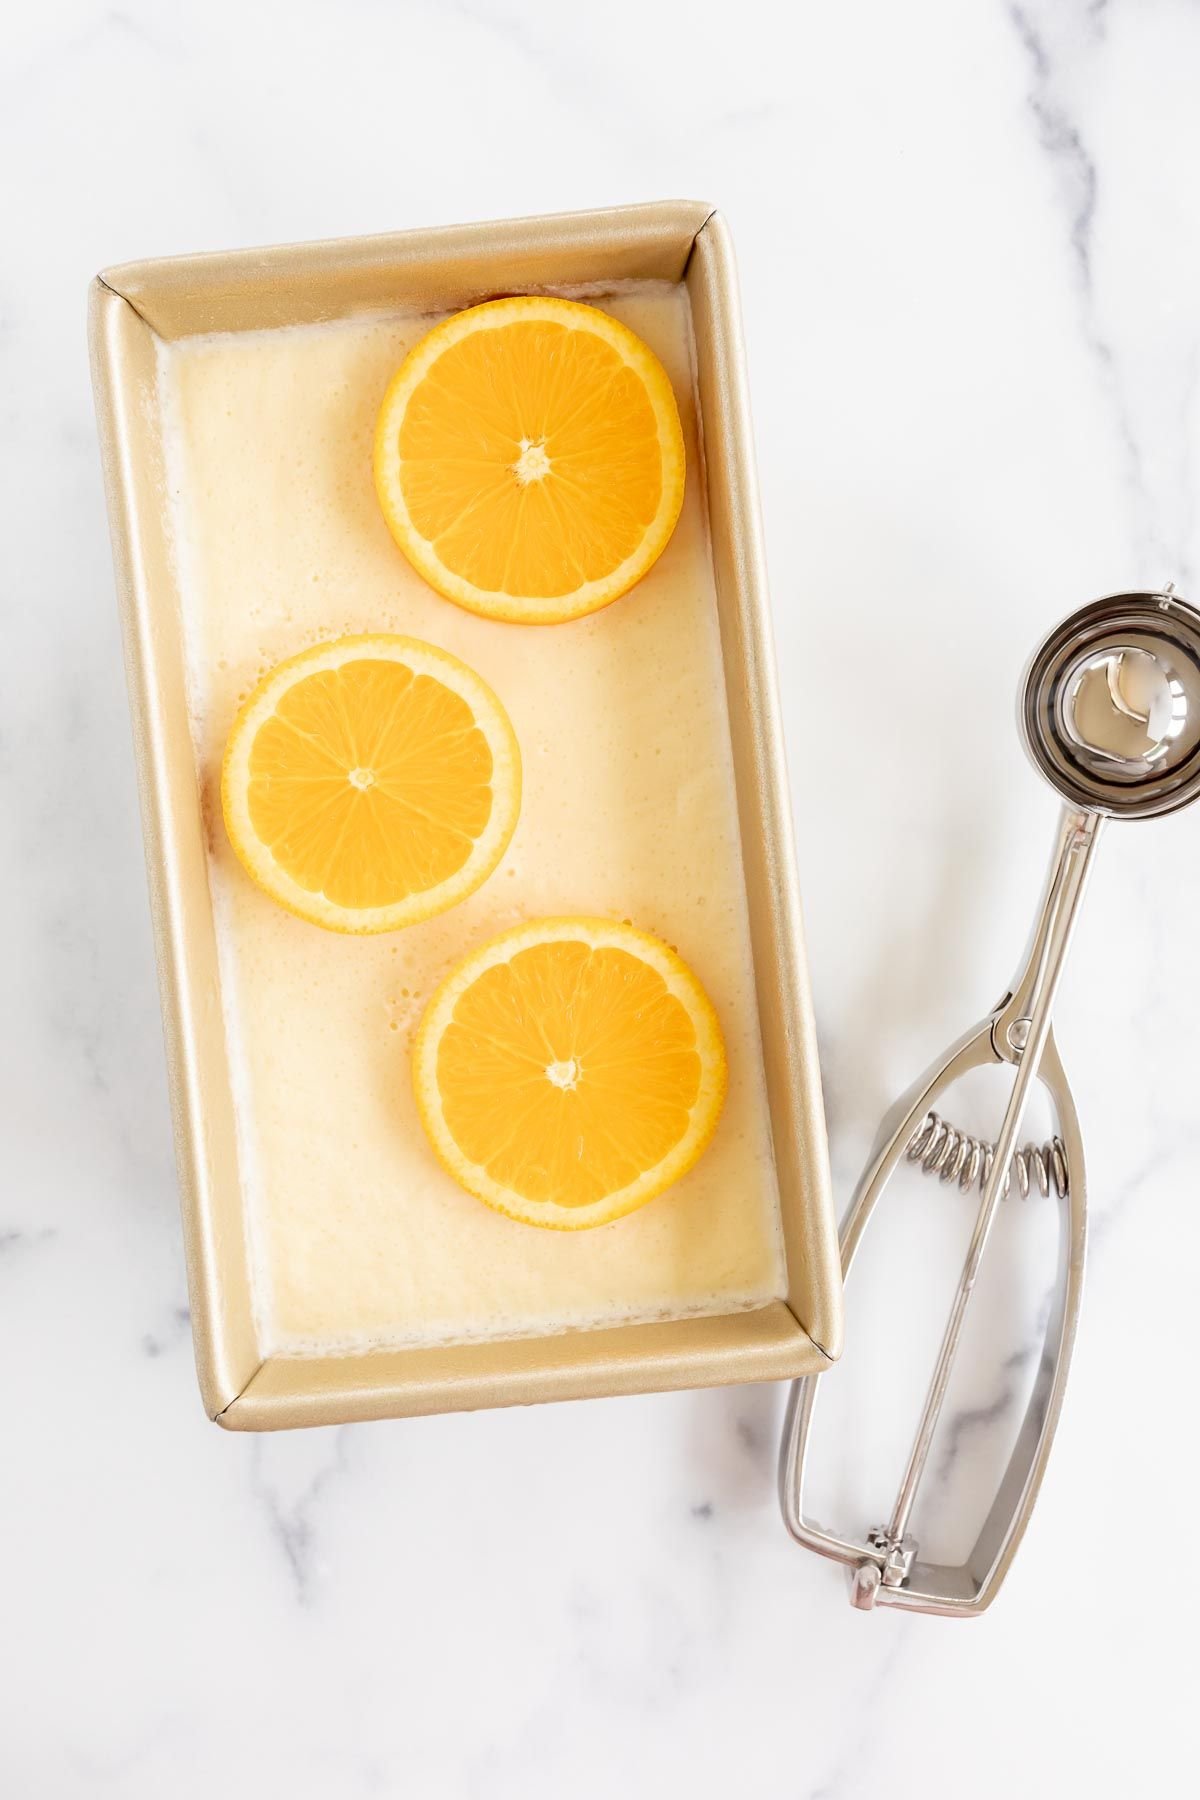 Homemade orange sherbet in a gold loaf pan, with an ice cream scoop